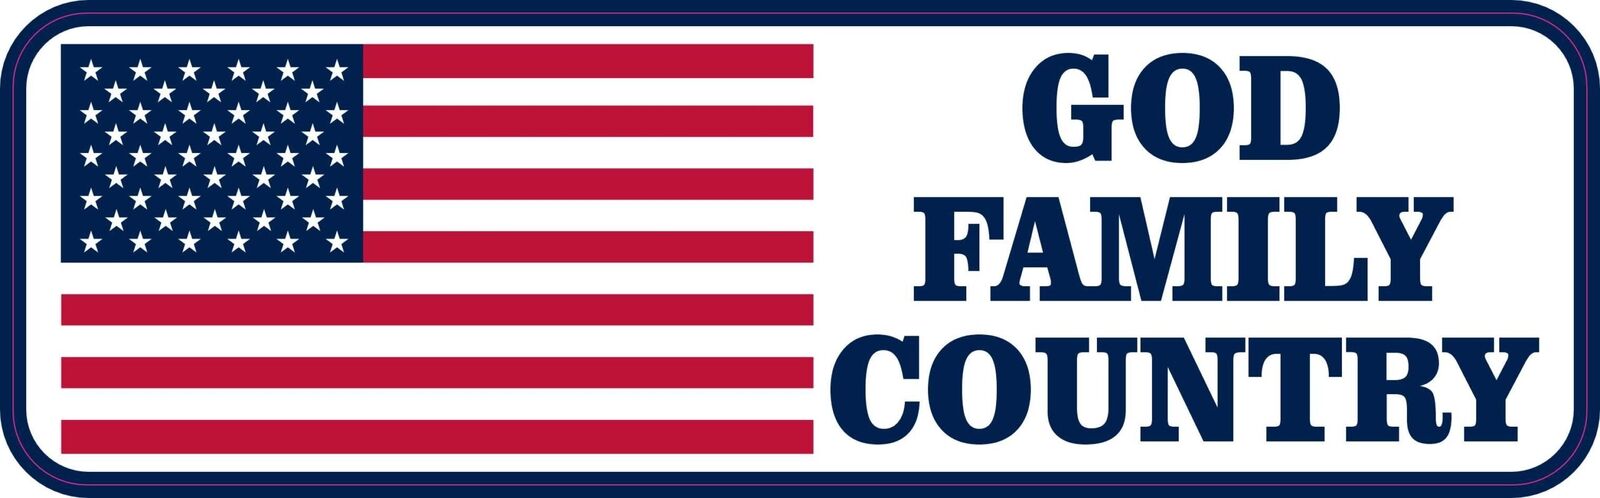 10in x 3in Patriotic God Family Country Magnet Car Truck Vehicle Magnetic Sign